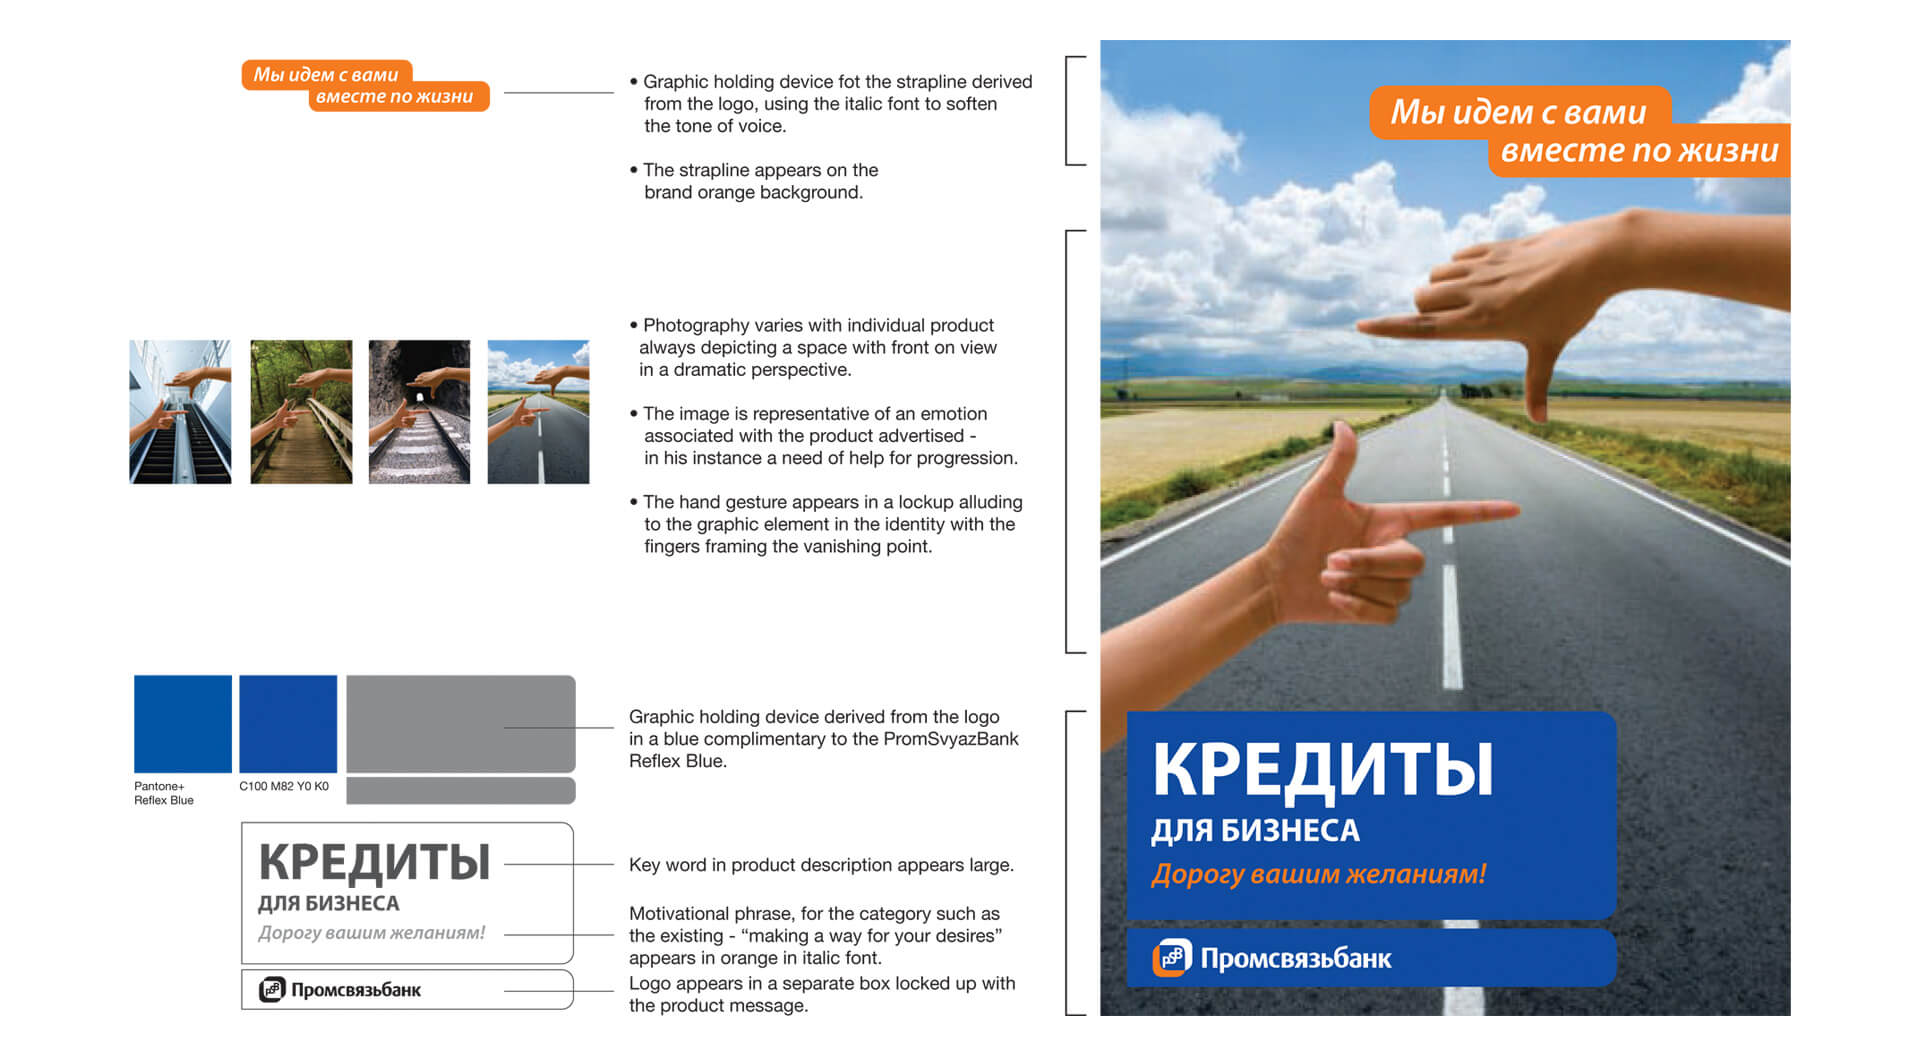 Promsvyazbank in branch point of sale marketing material